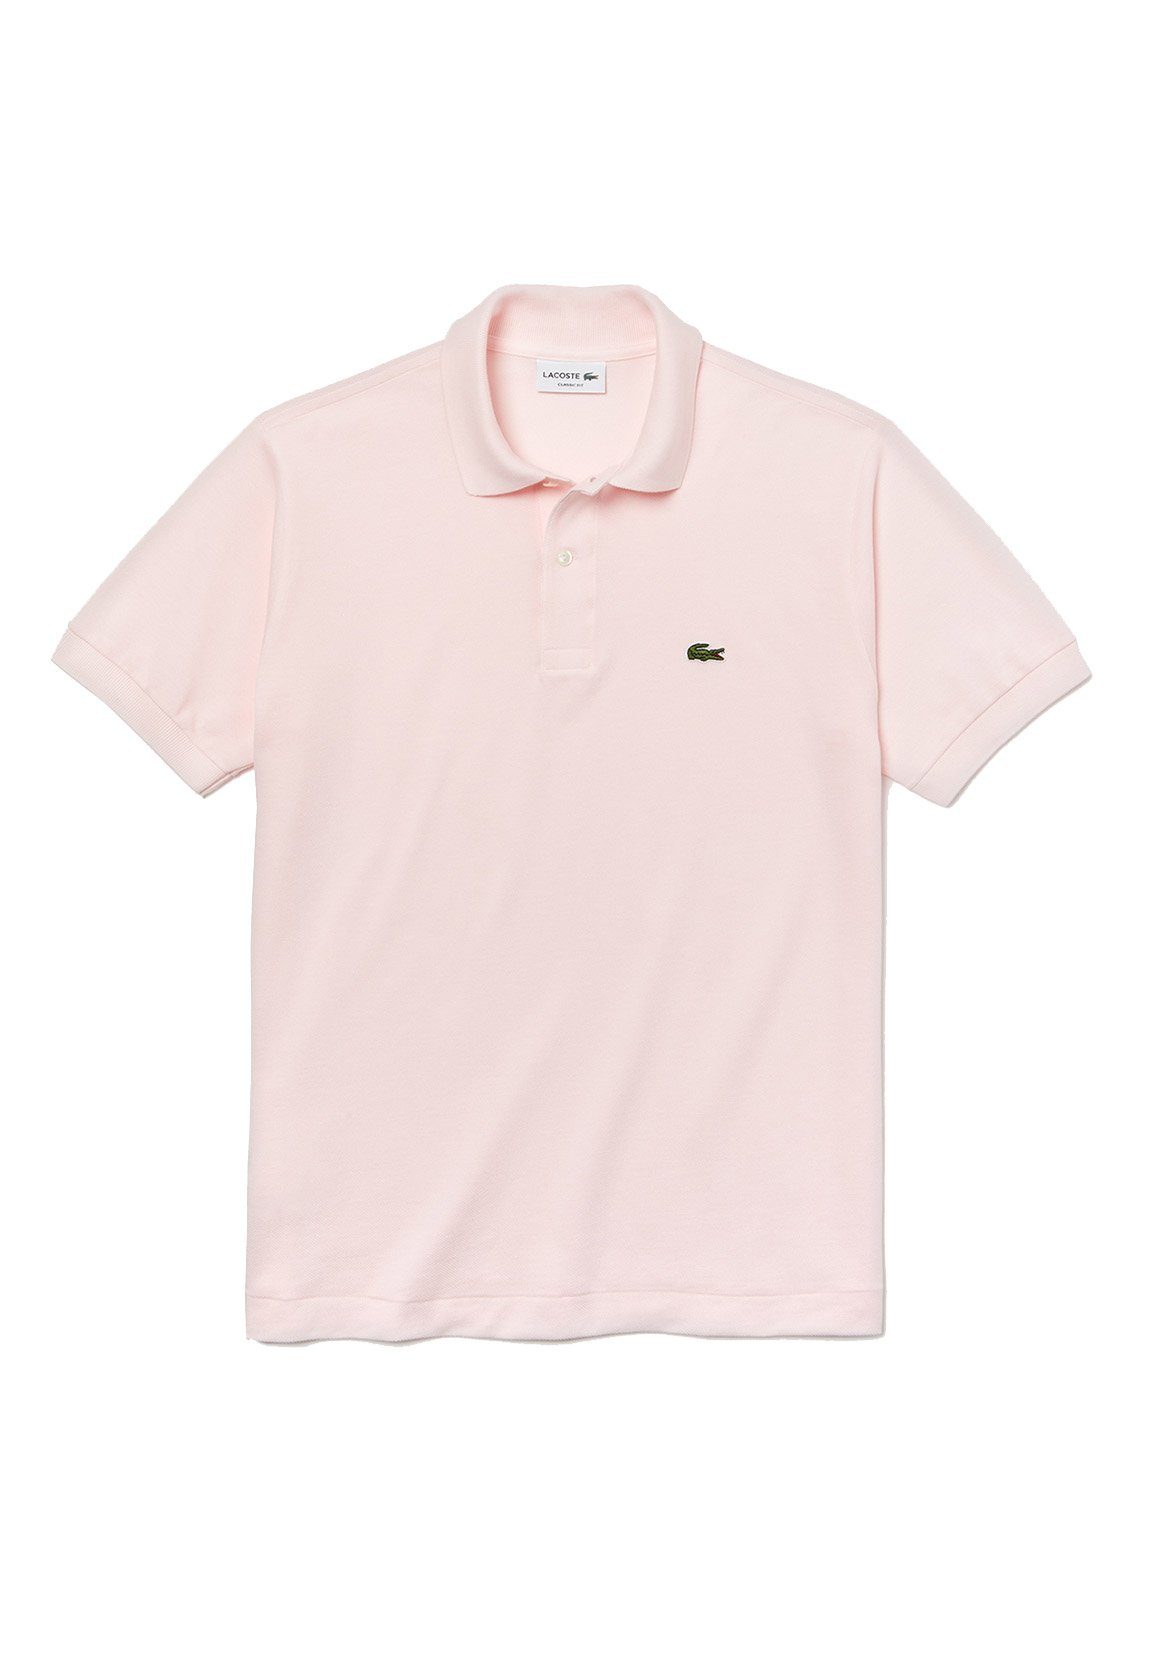 Polo L1212 Rose SHIRT SLEEVED Lacoste Rosa Pale hellrosa Poloshirt Lacoste COLLAR RIBBED SHORT